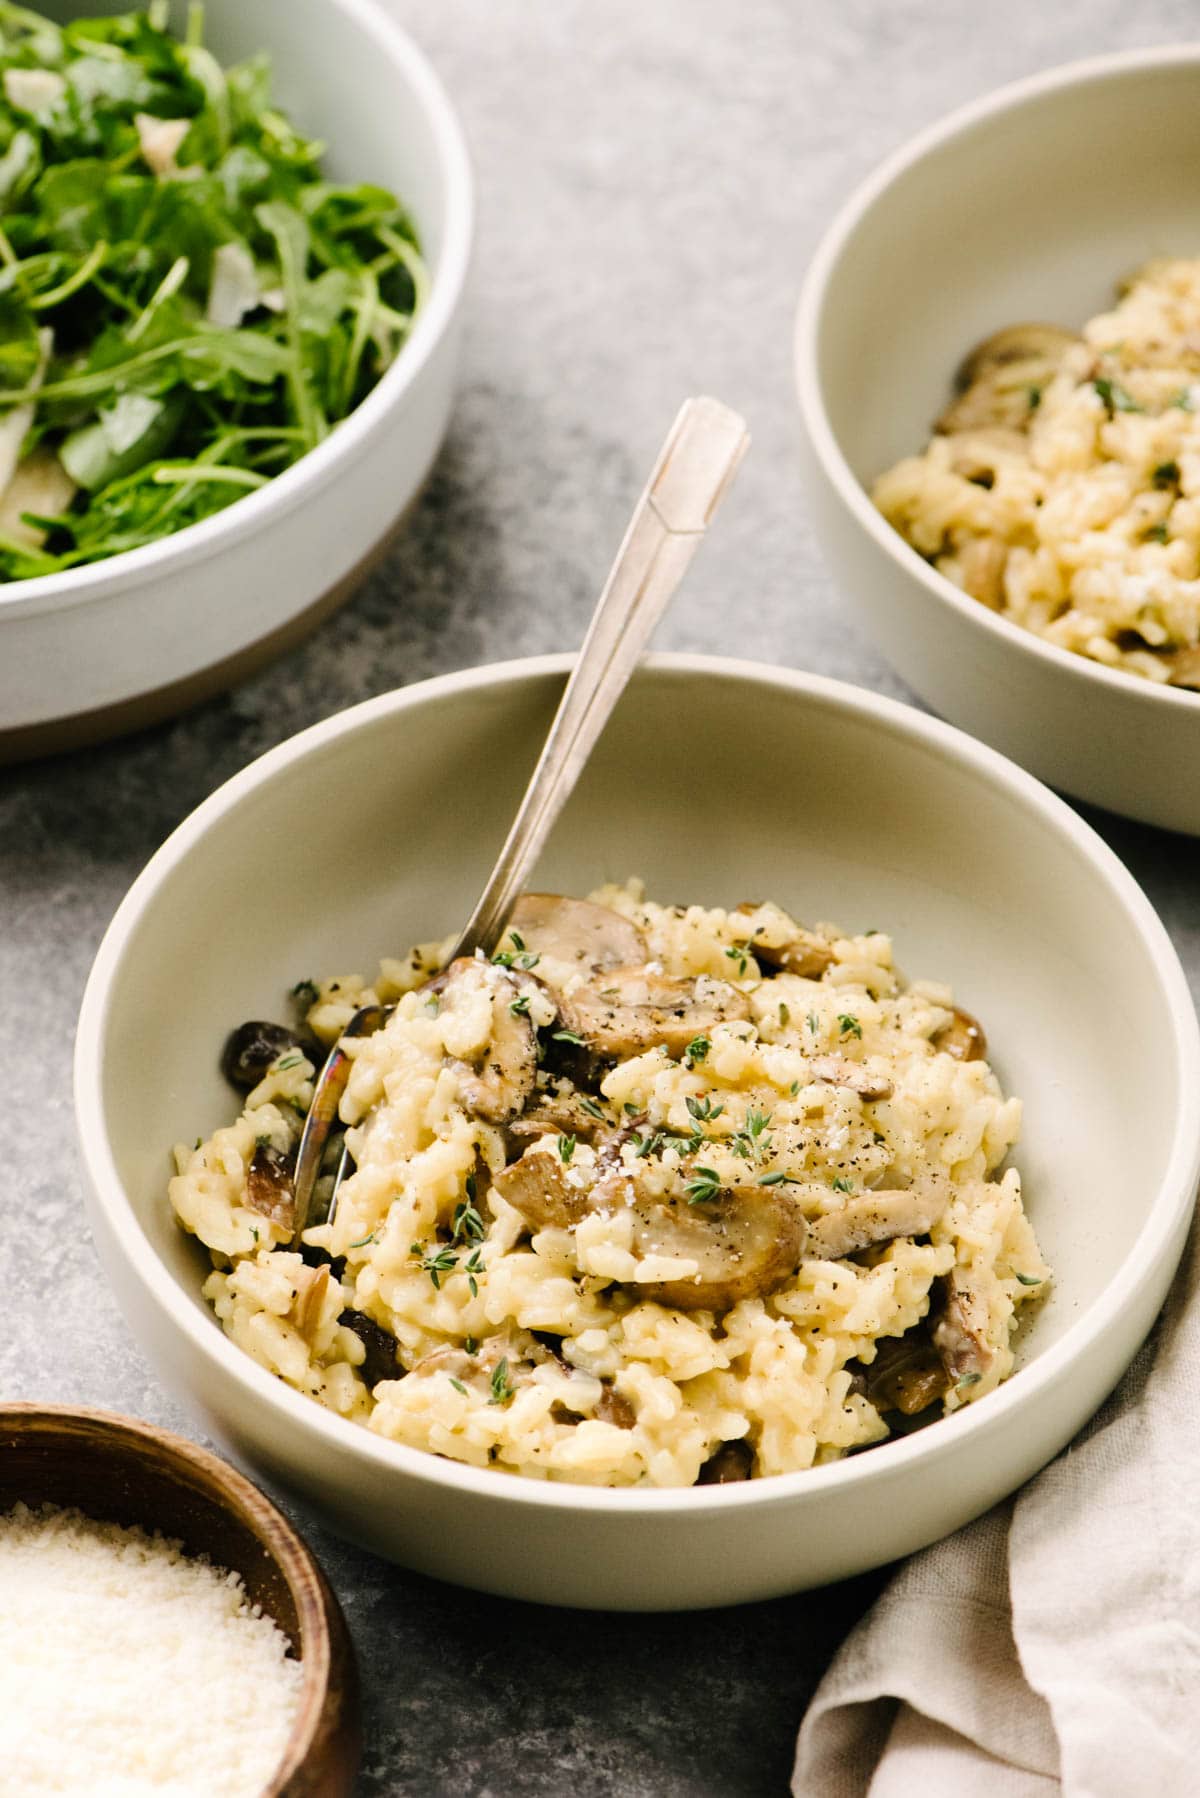 Side view, two bowls of Instant Pot mushroom risotto on a concrete background, surrounded by an arugula salad, cream linen napkin, and small wood bowl of grated parmesan cheese.